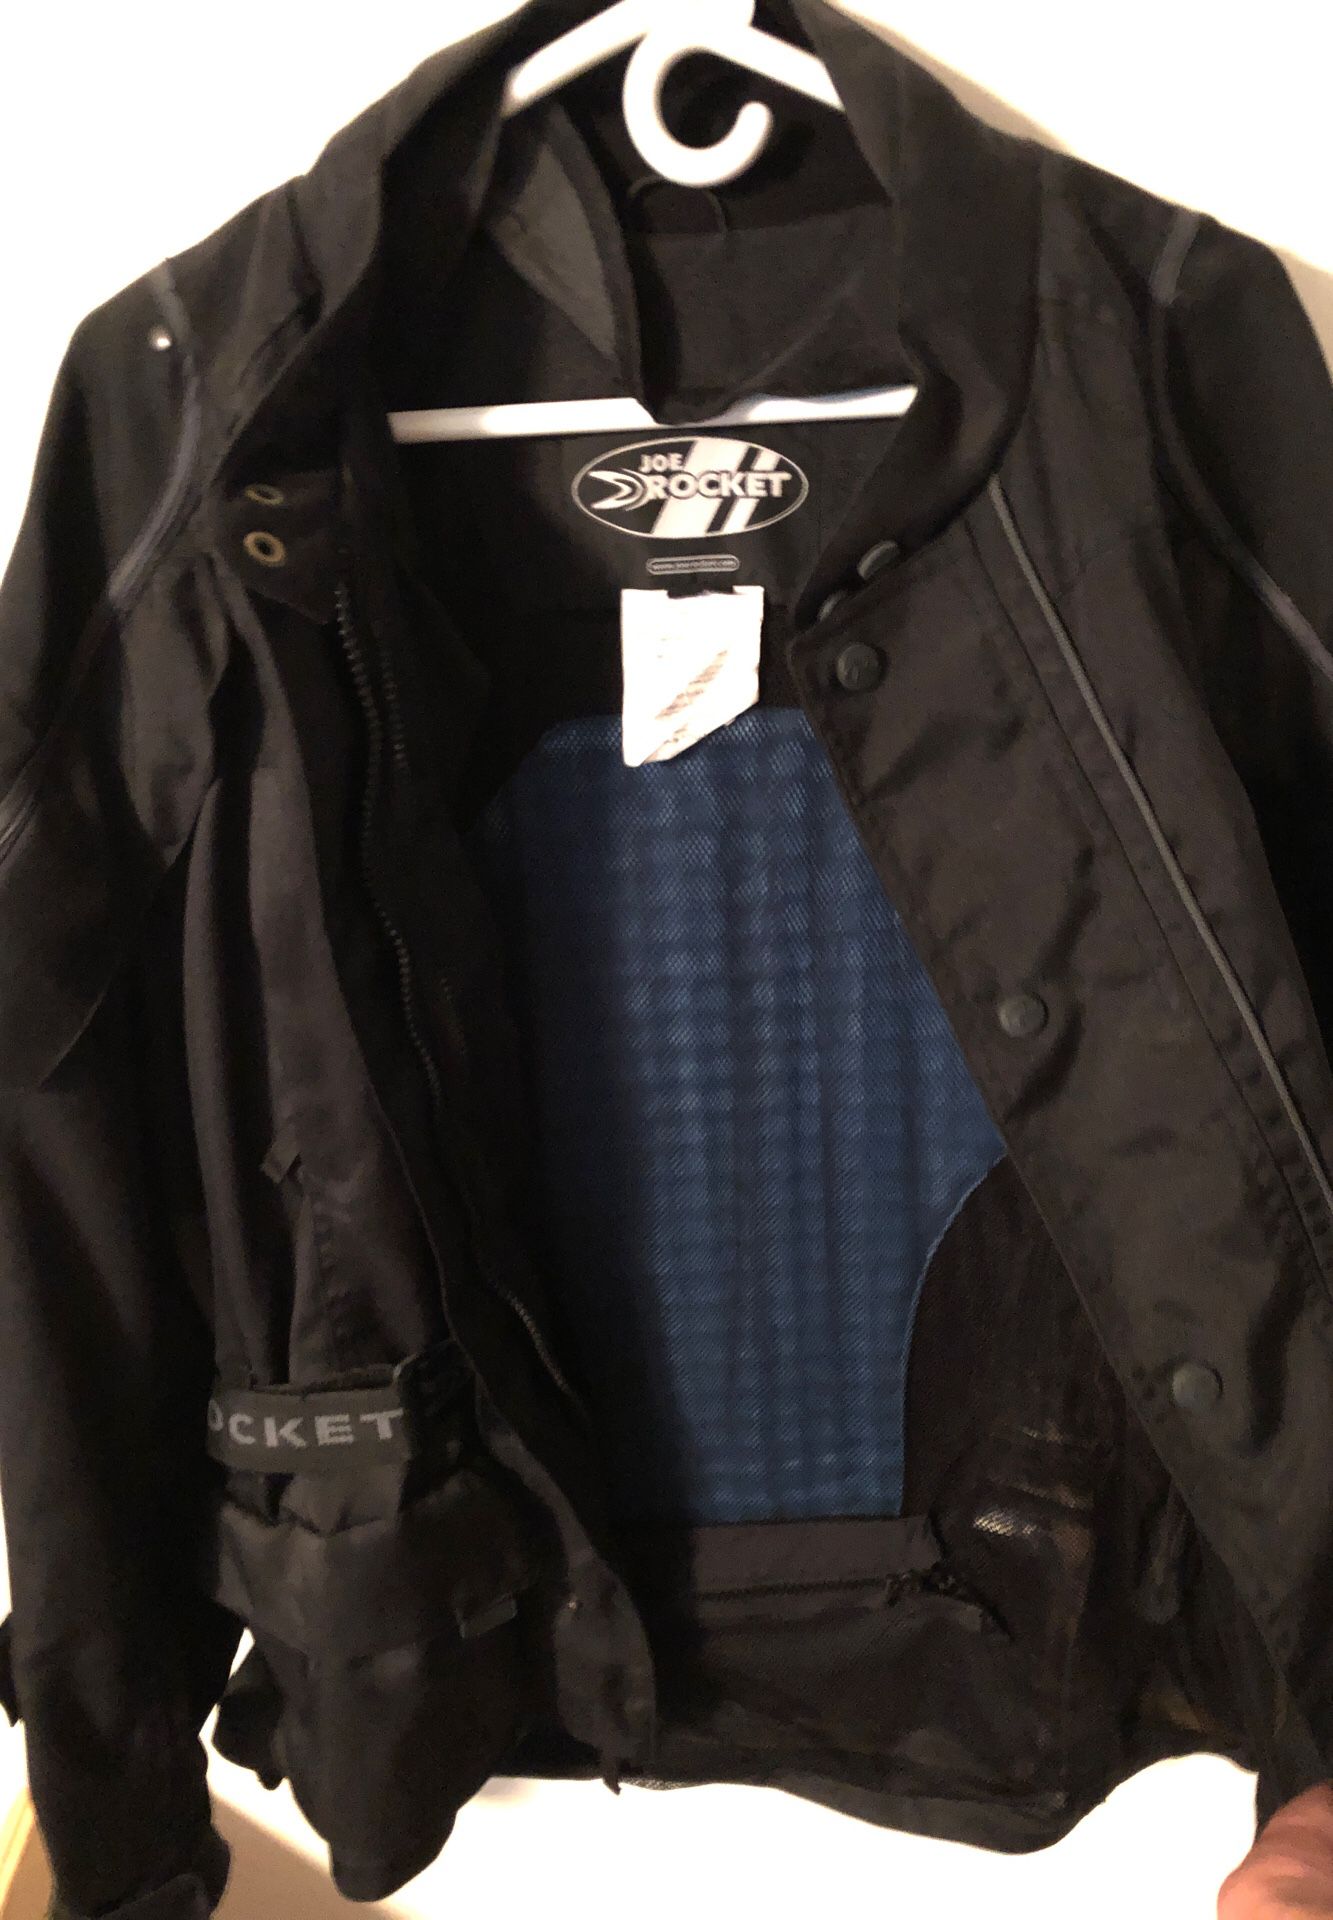 Protective motorcycle riding gear